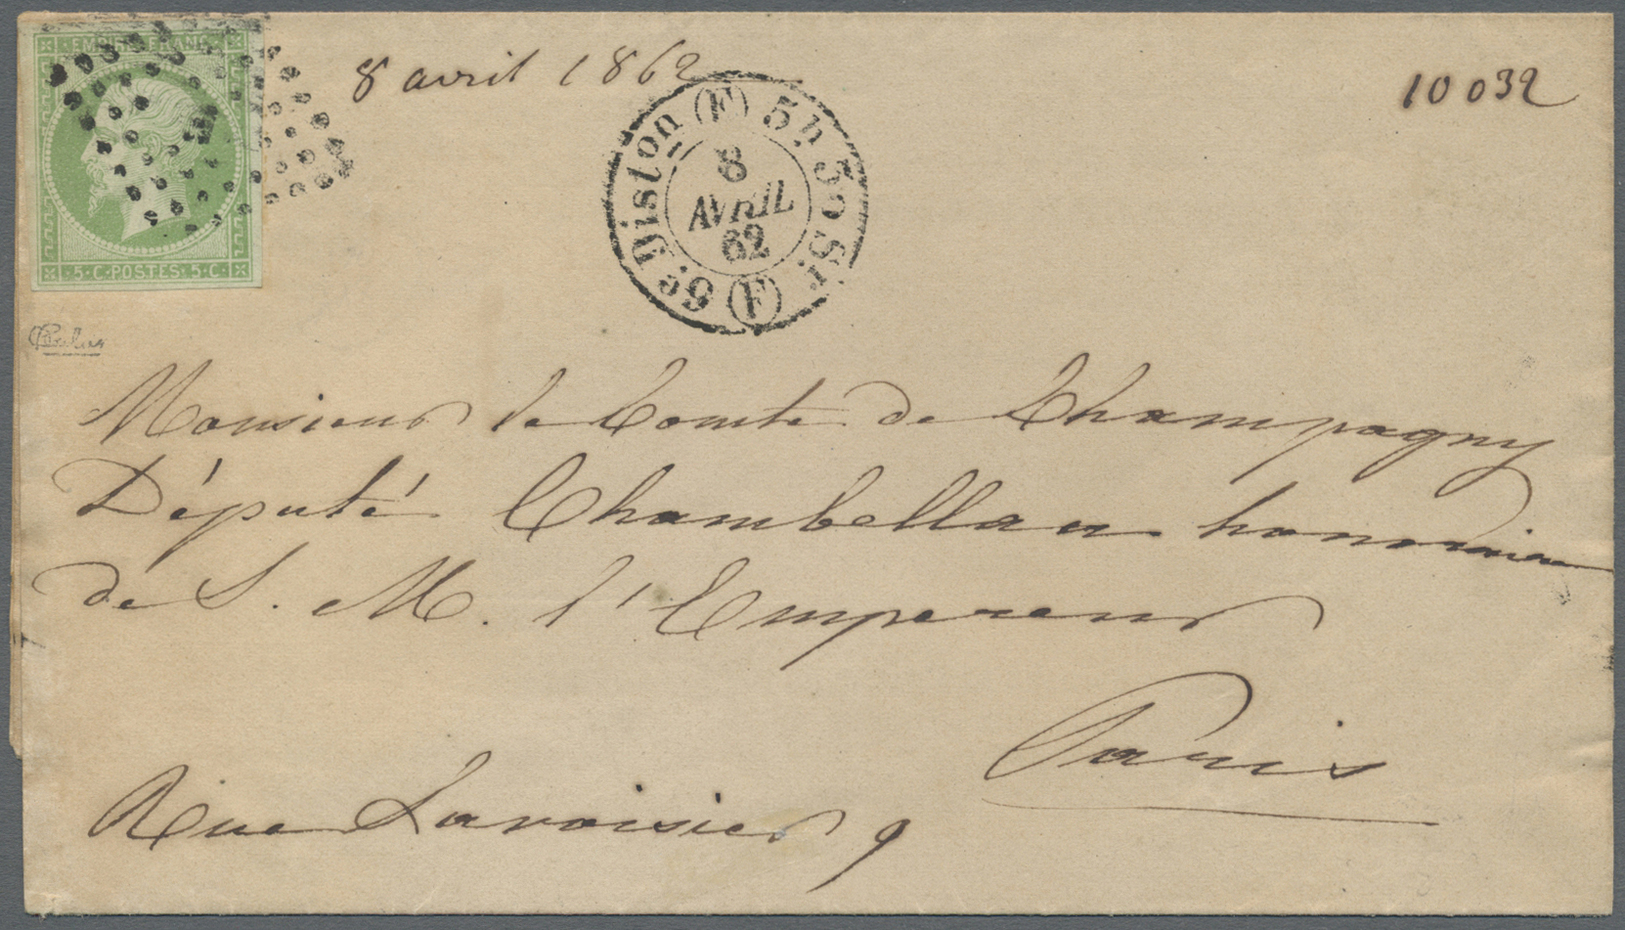 Br Frankreich: 1862, 5c. Green "Empire Nd", Single Franking On Local Lettersheet From Paris, Clearly Oblit. By  L - Used Stamps